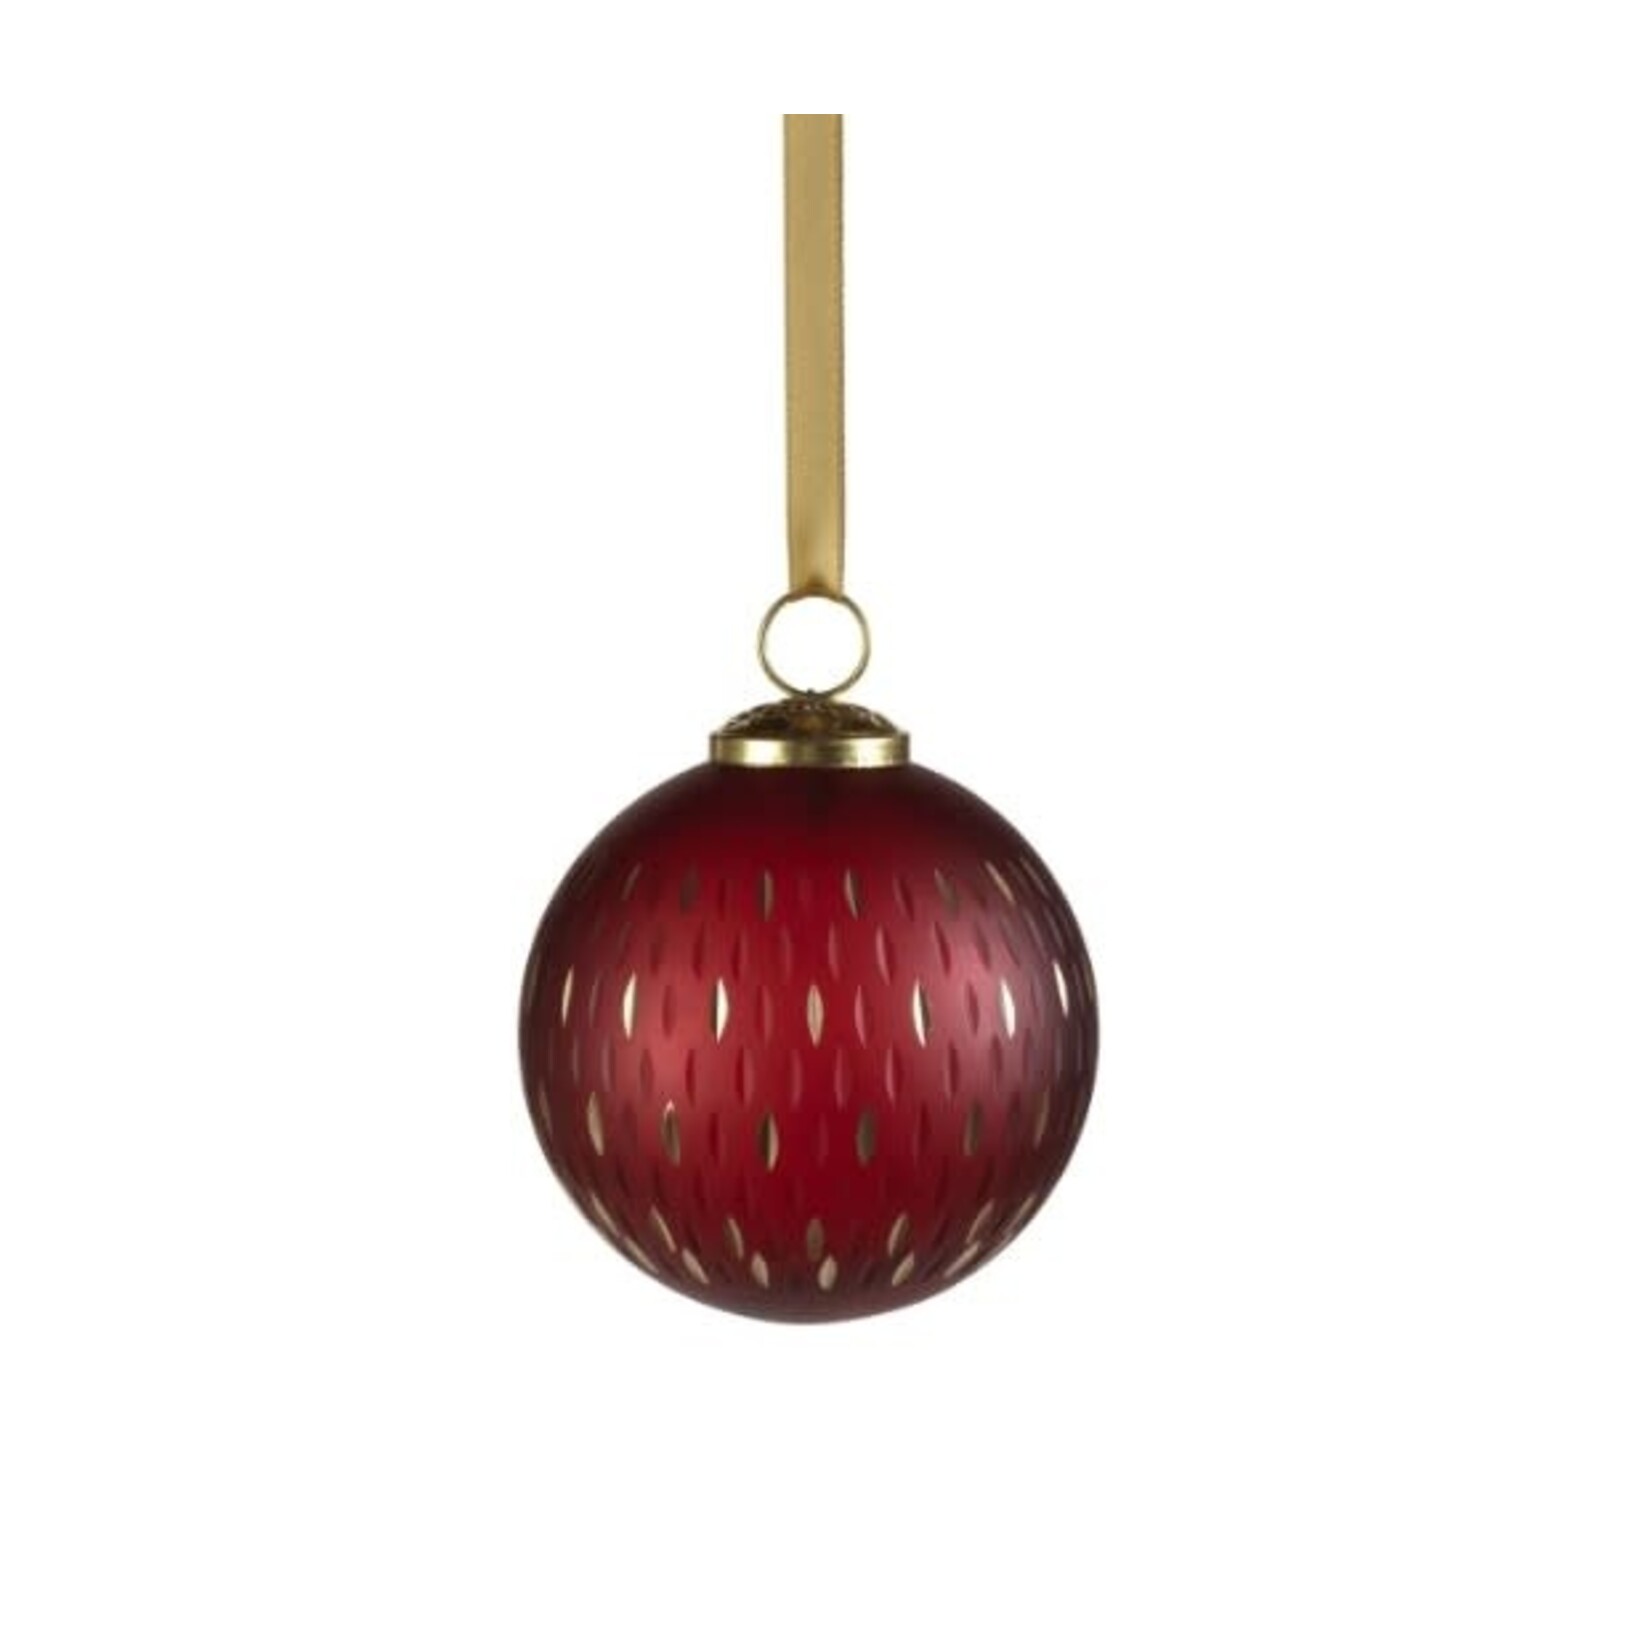 Zodax Frosted & Etched in Gold Glass Ornament Red